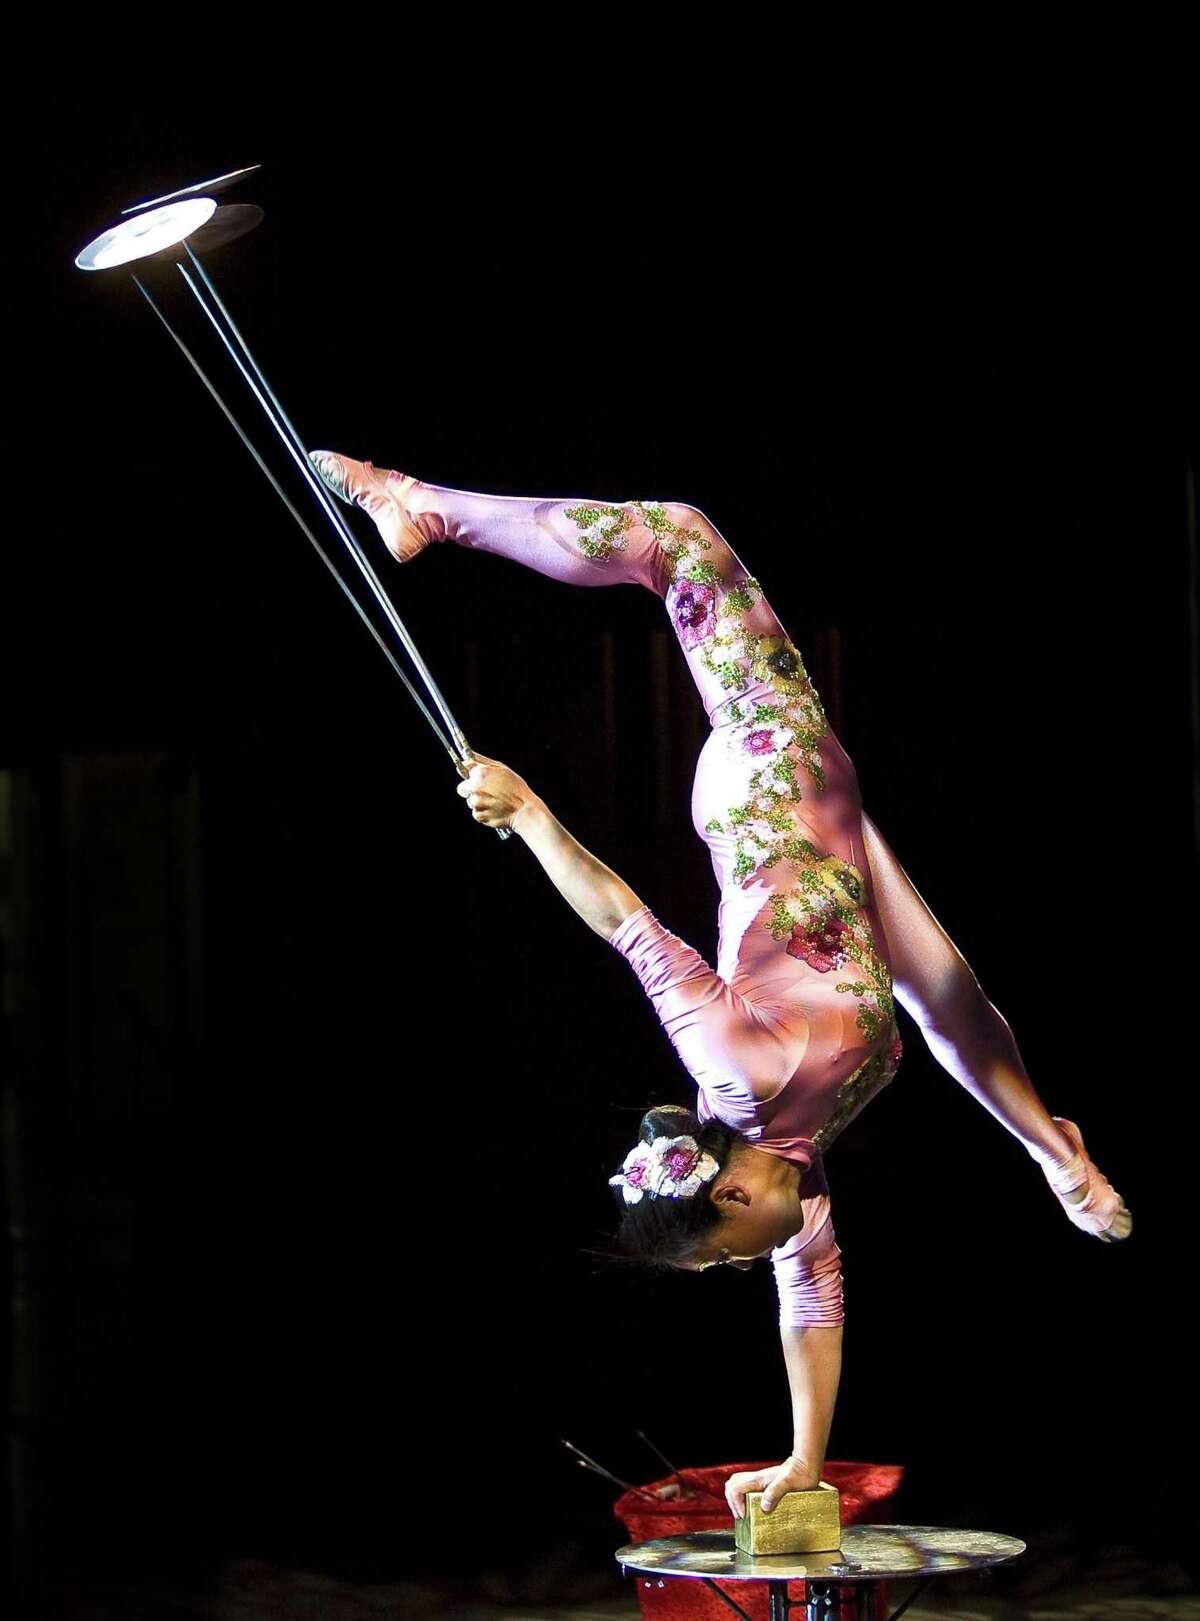 Chinese acrobat Li Liu will perform during a day-long international “Take Your Child to Library Day” celebration at the Pequot Library in Fairfield’s Southport section on Feb. 2.